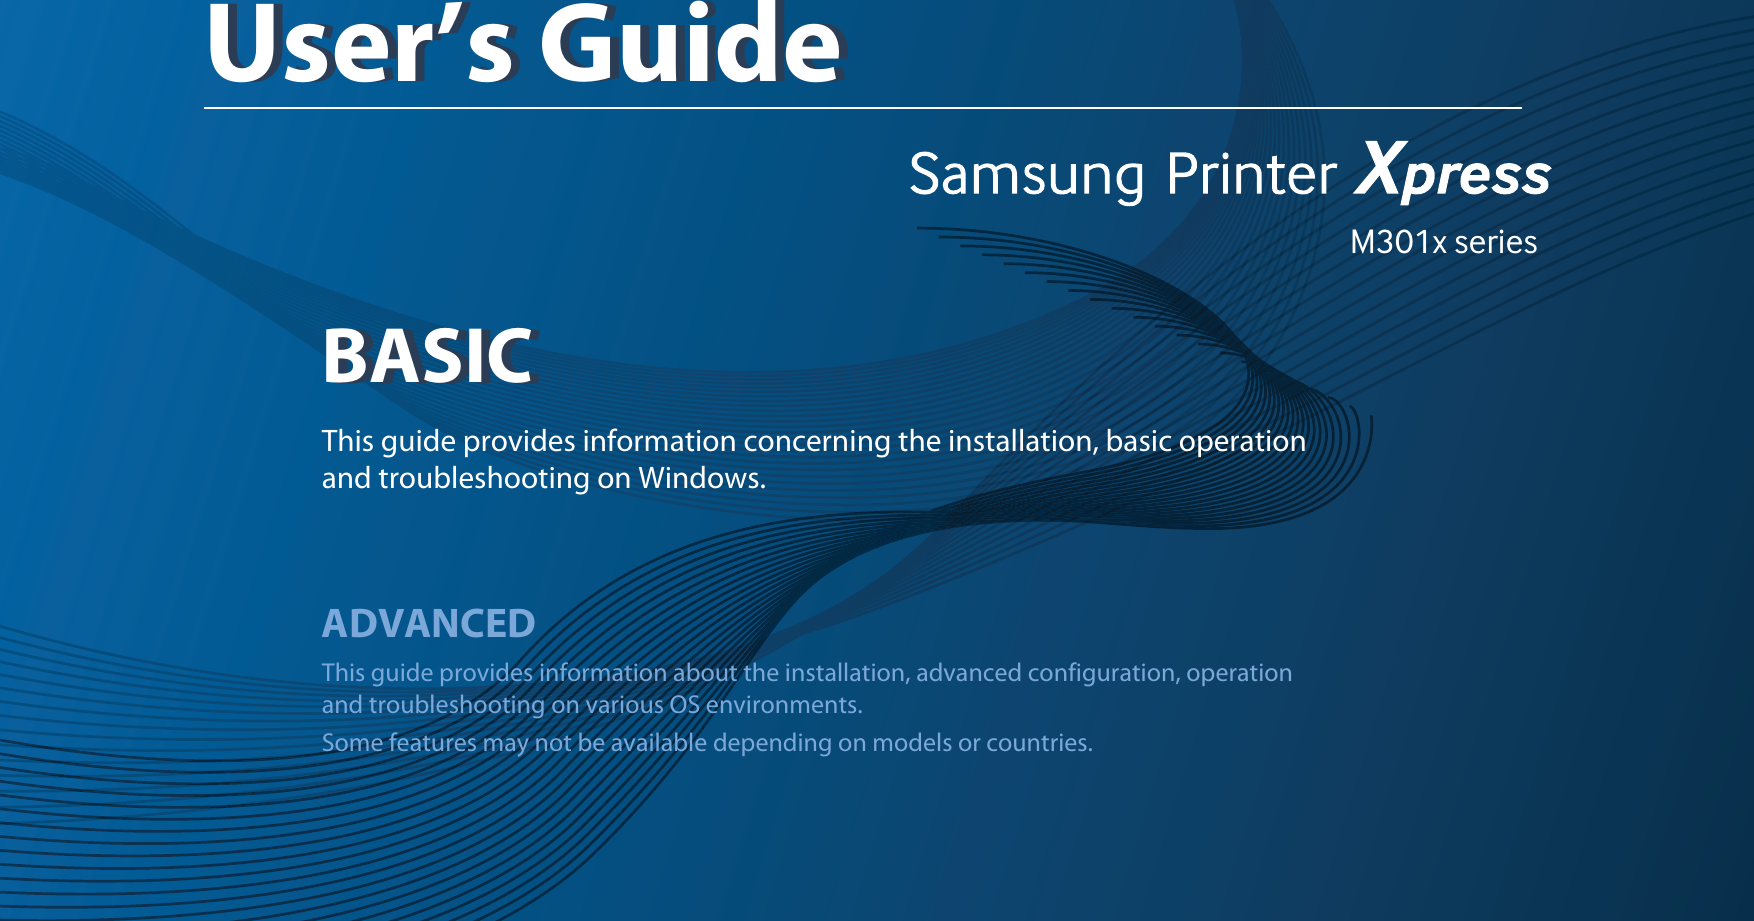 M301x seriesBASICUser’s GuideBASICUser’s GuideThis guide provides information concerning the installation, basic operation and troubleshooting on Windows.ADVANCEDThis guide provides information about the installation, advanced configuration, operation and troubleshooting on various OS environments. Some features may not be available depending on models or countries.